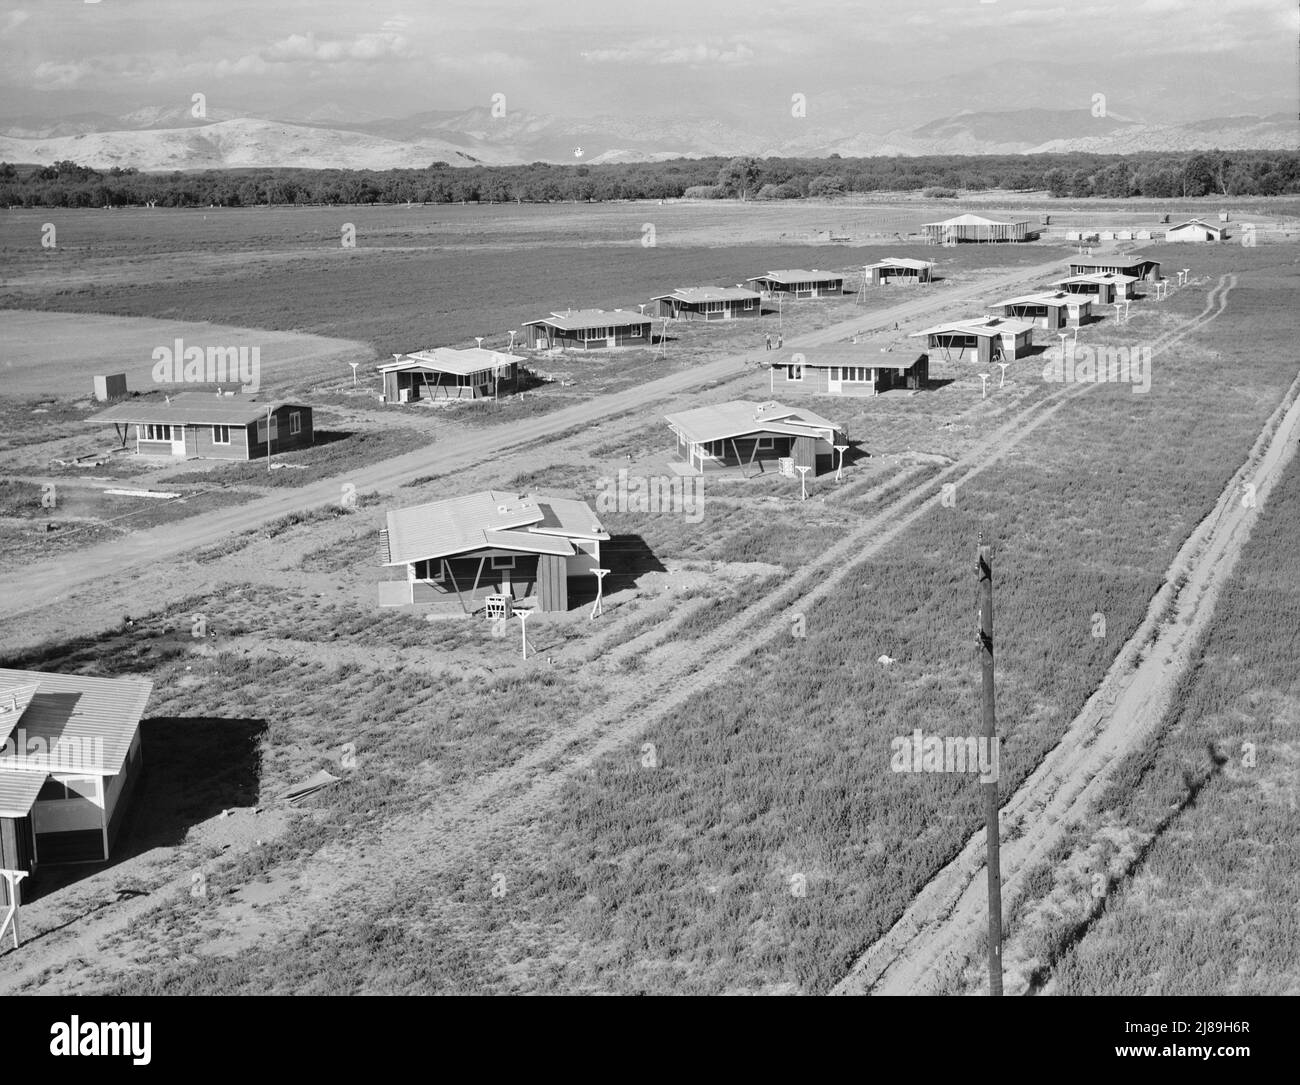 Tulare County, California. New homes for families on the Mineral King cooperative farms. This farm is situated on the site of an old ranch. Employs eighteen families; comprises 500 acres of alfalfa and cotton lands. Large-scale farming methods. Stock Photo